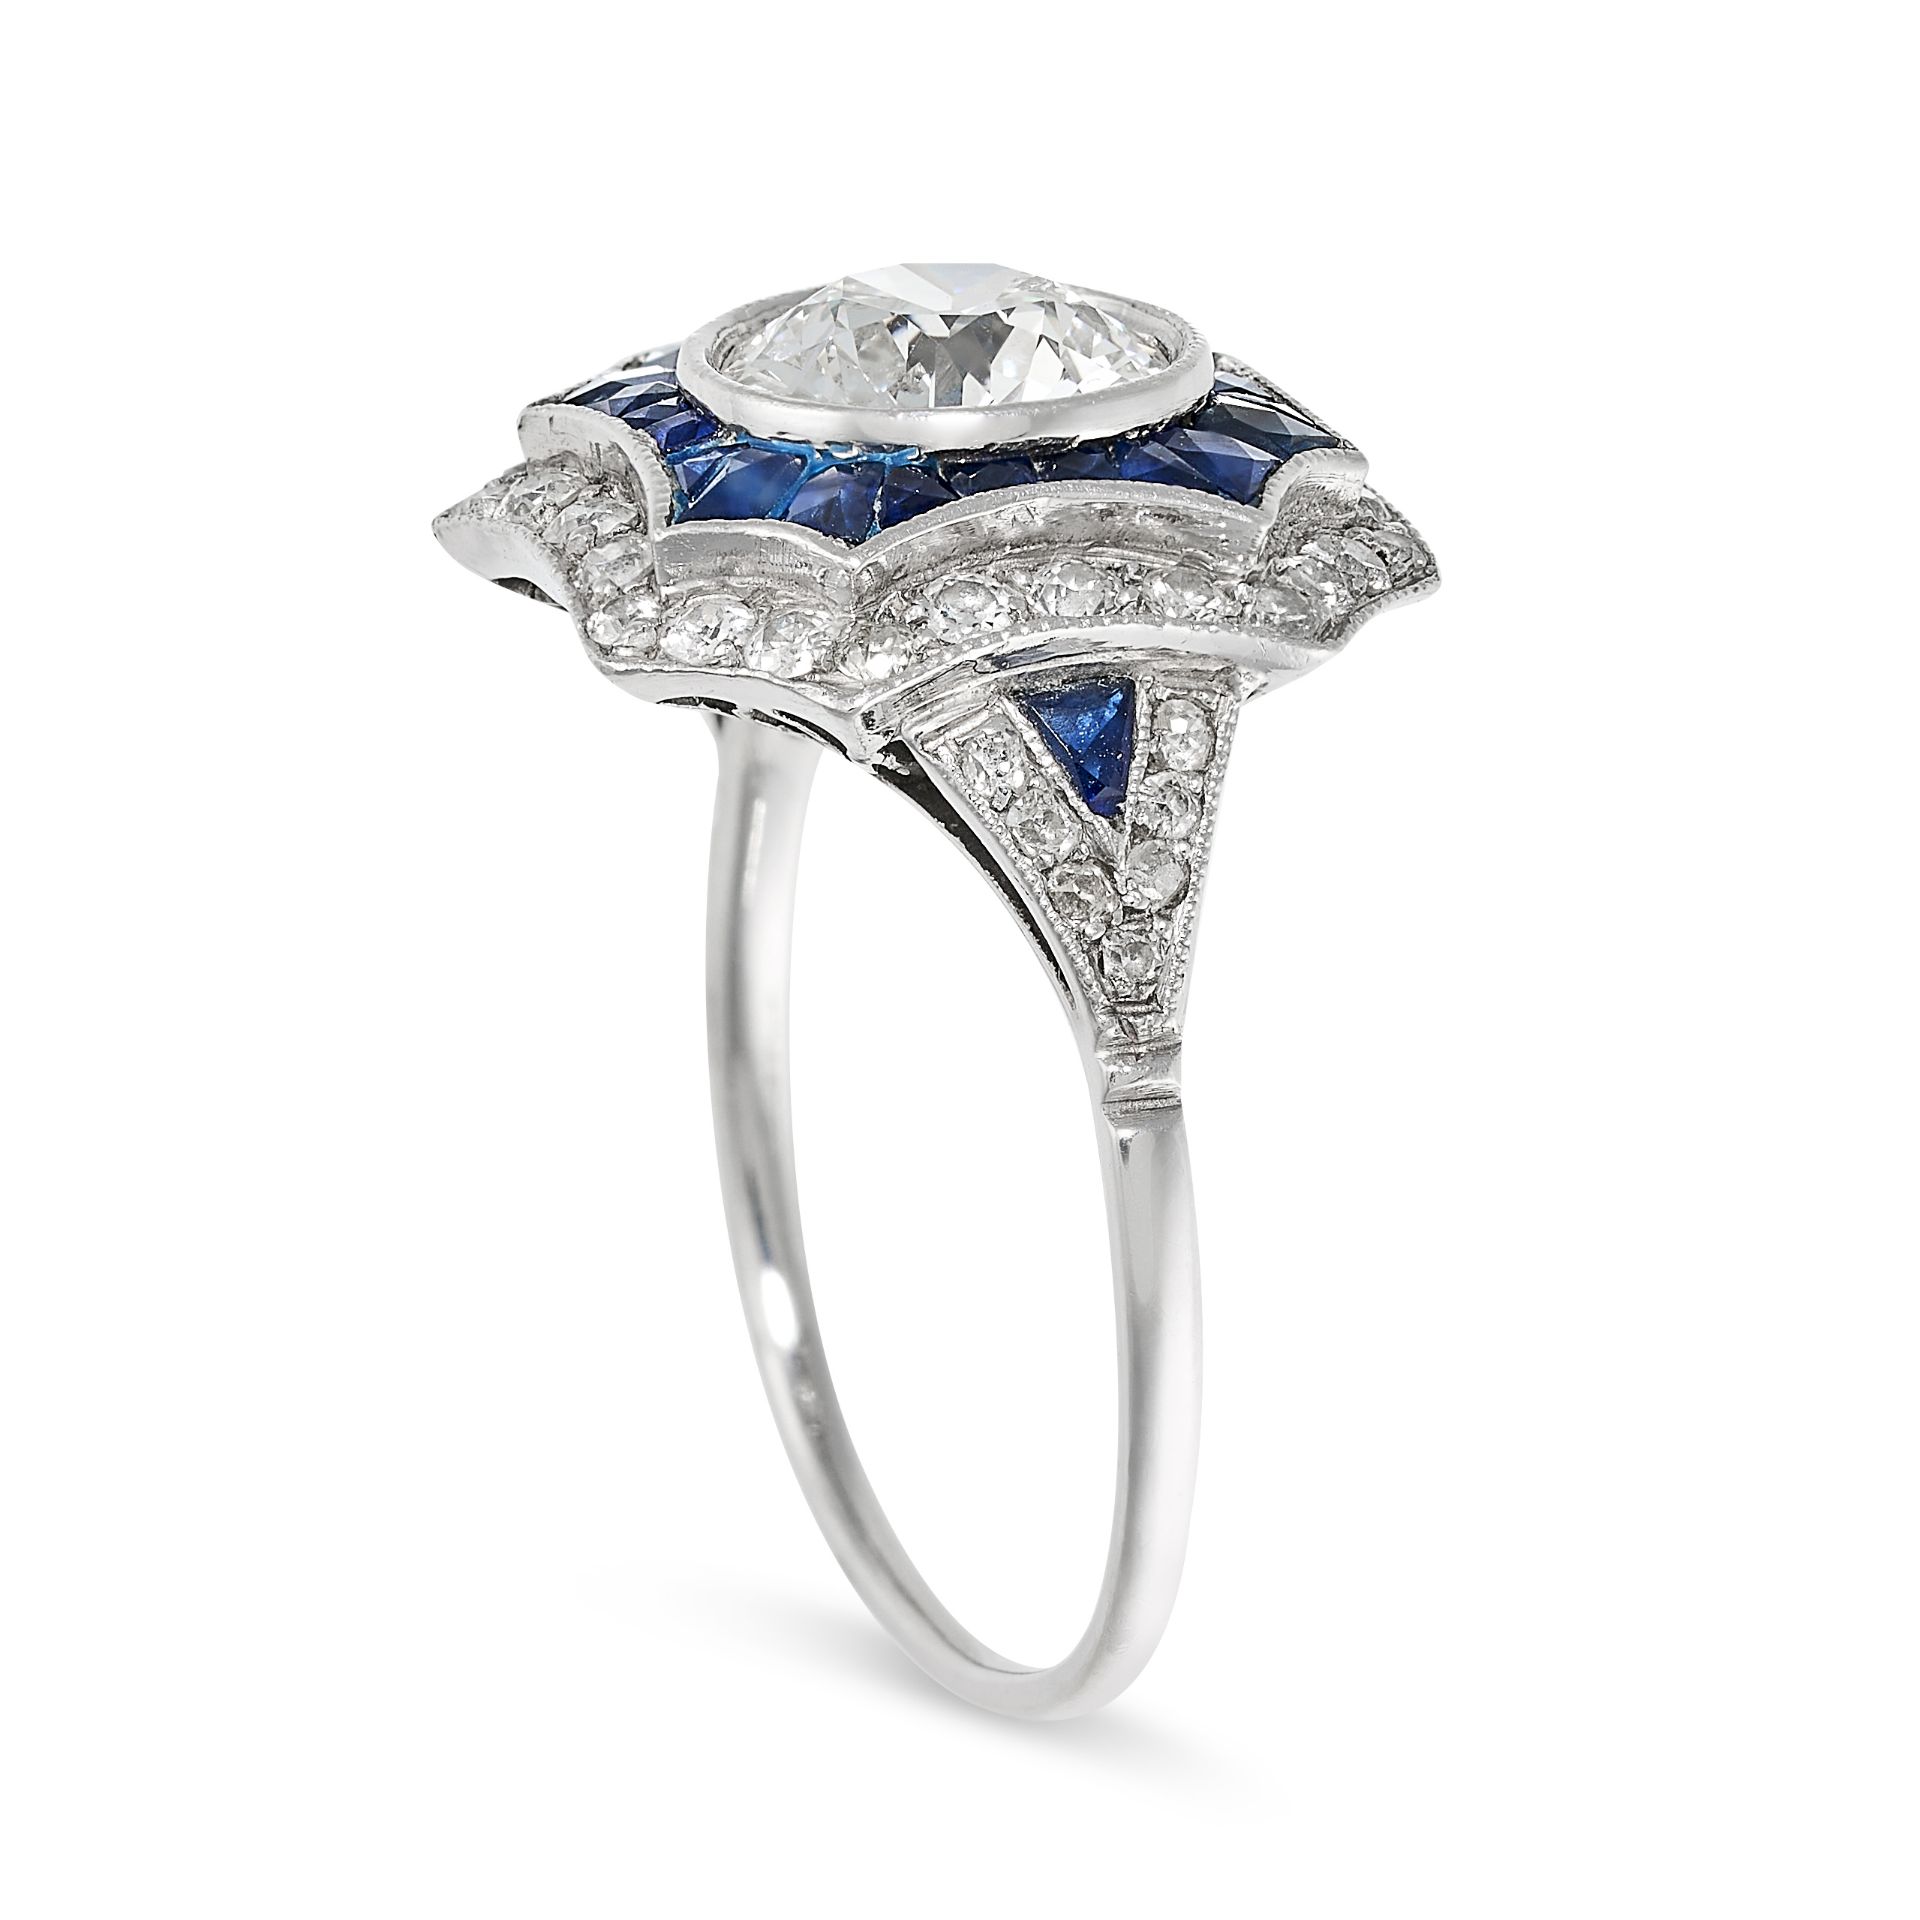 AN ART DECO SAPPHIRE AND DIAMOND DRESS RING in platinum, set with an old cut diamond of approxima... - Image 2 of 2